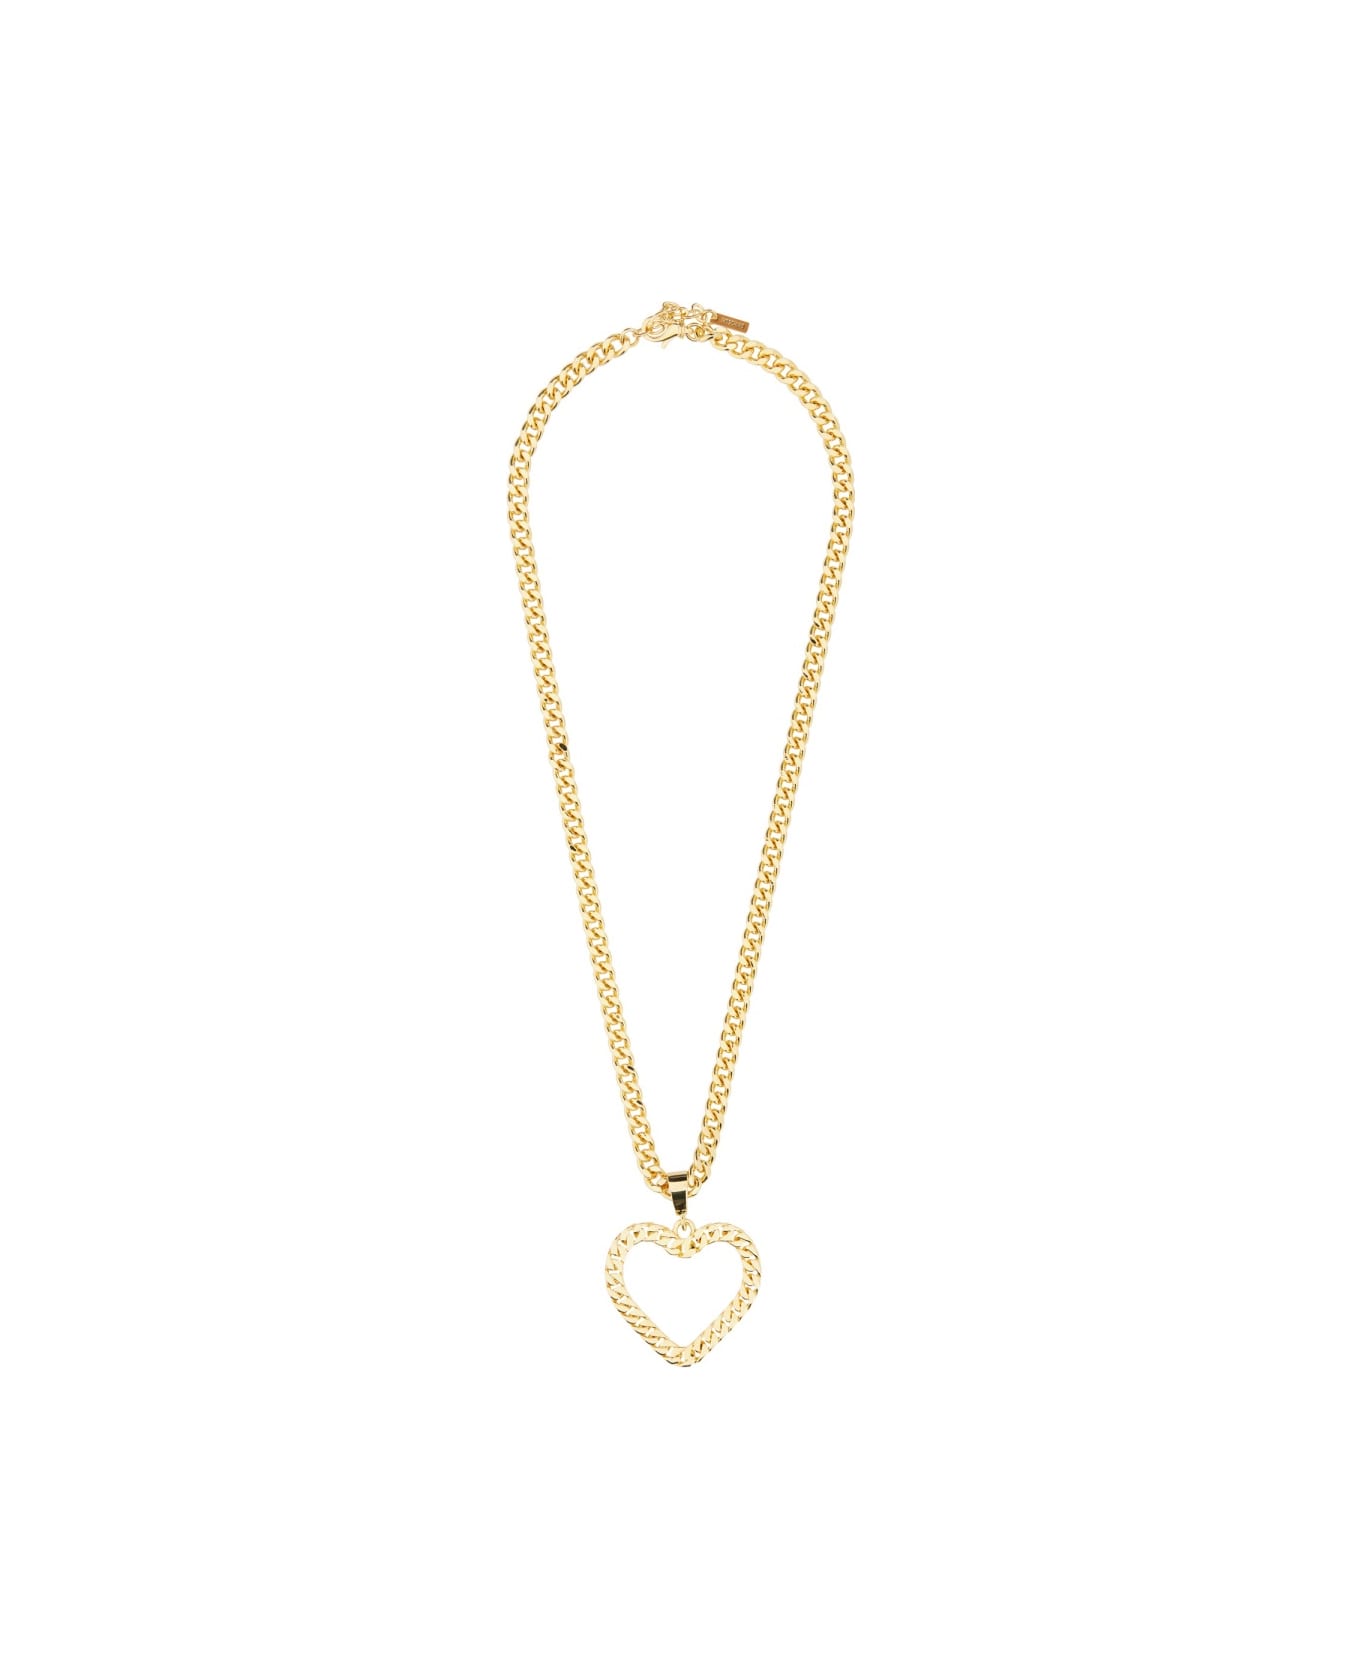 Moschino Chain Heart Necklace - GOLD